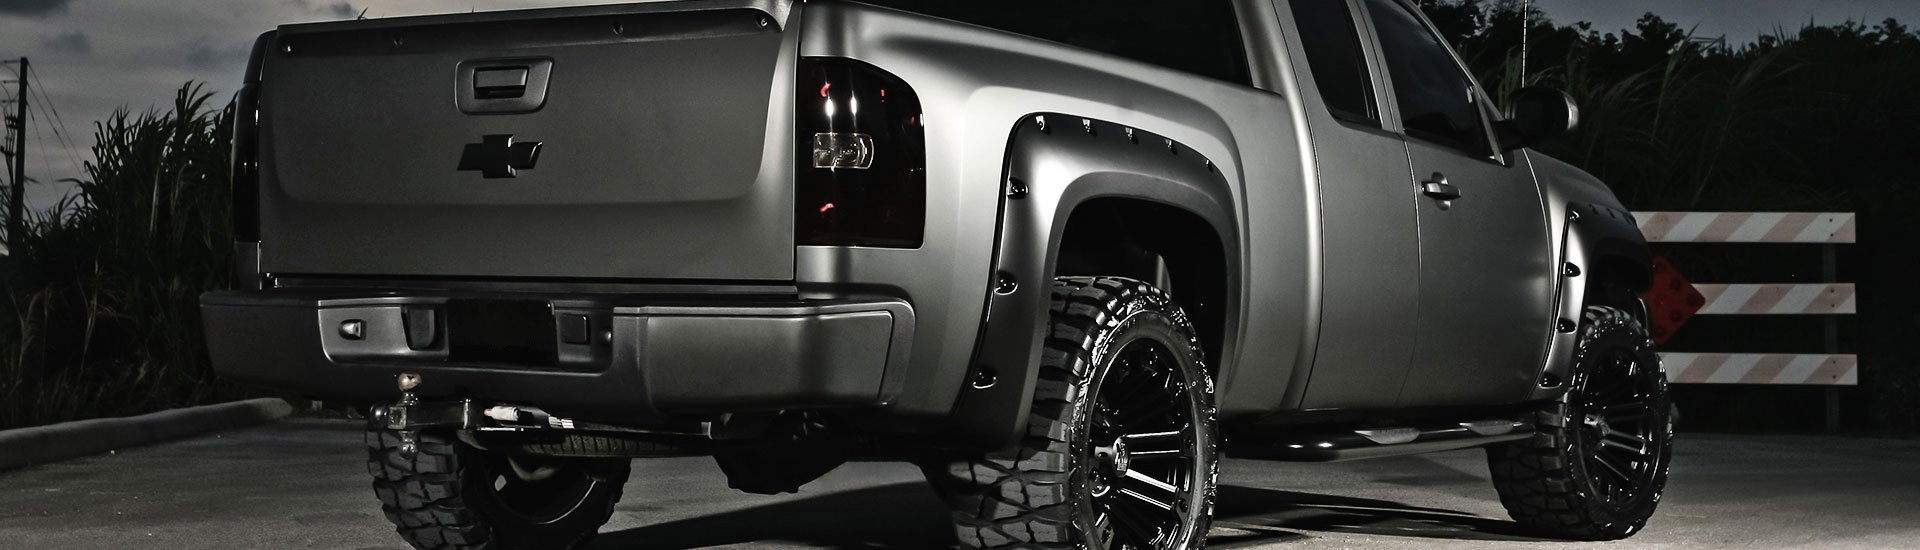 No-drill Fender Flares are So Easy to Install!